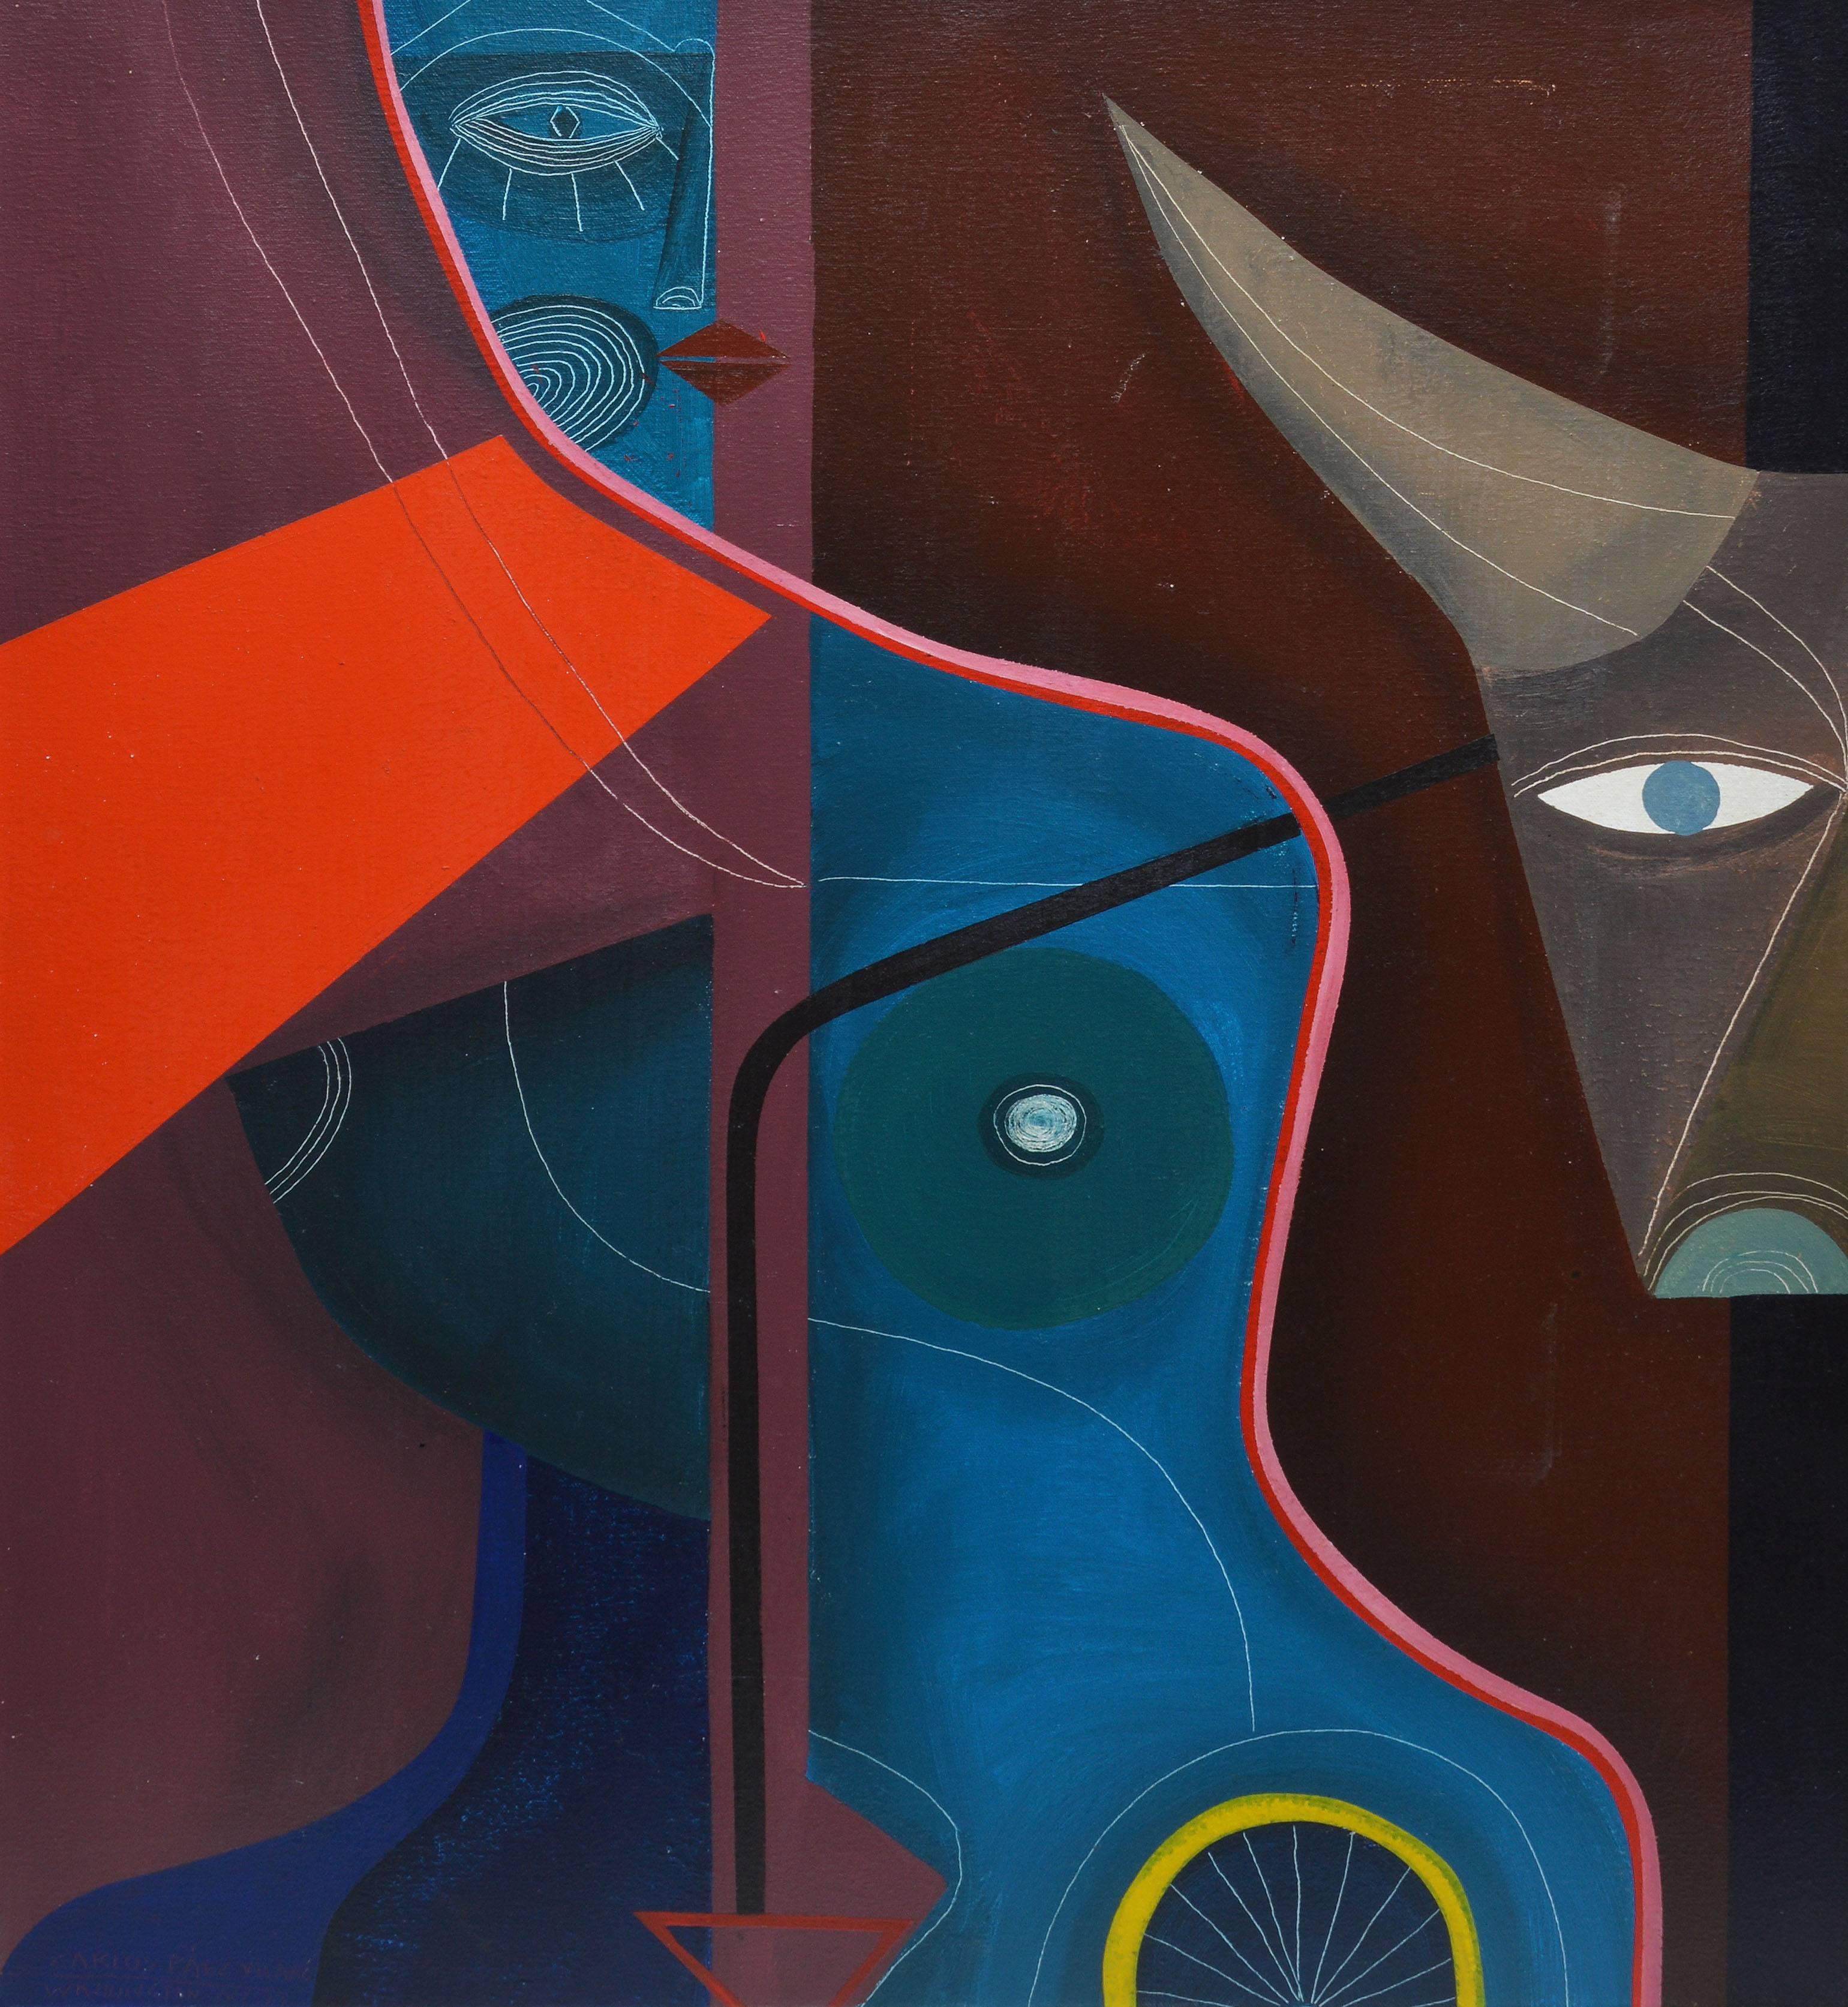 Modernist composition with a nude figure by Carlos Paez Vilaro (1923-2014).  Oil on canvas, circa 1977.  Signed lower left, "Carlos Paez Vilaro".  Displayed in a silver metal modernist frame.  Image size, 24"L x 30"H.